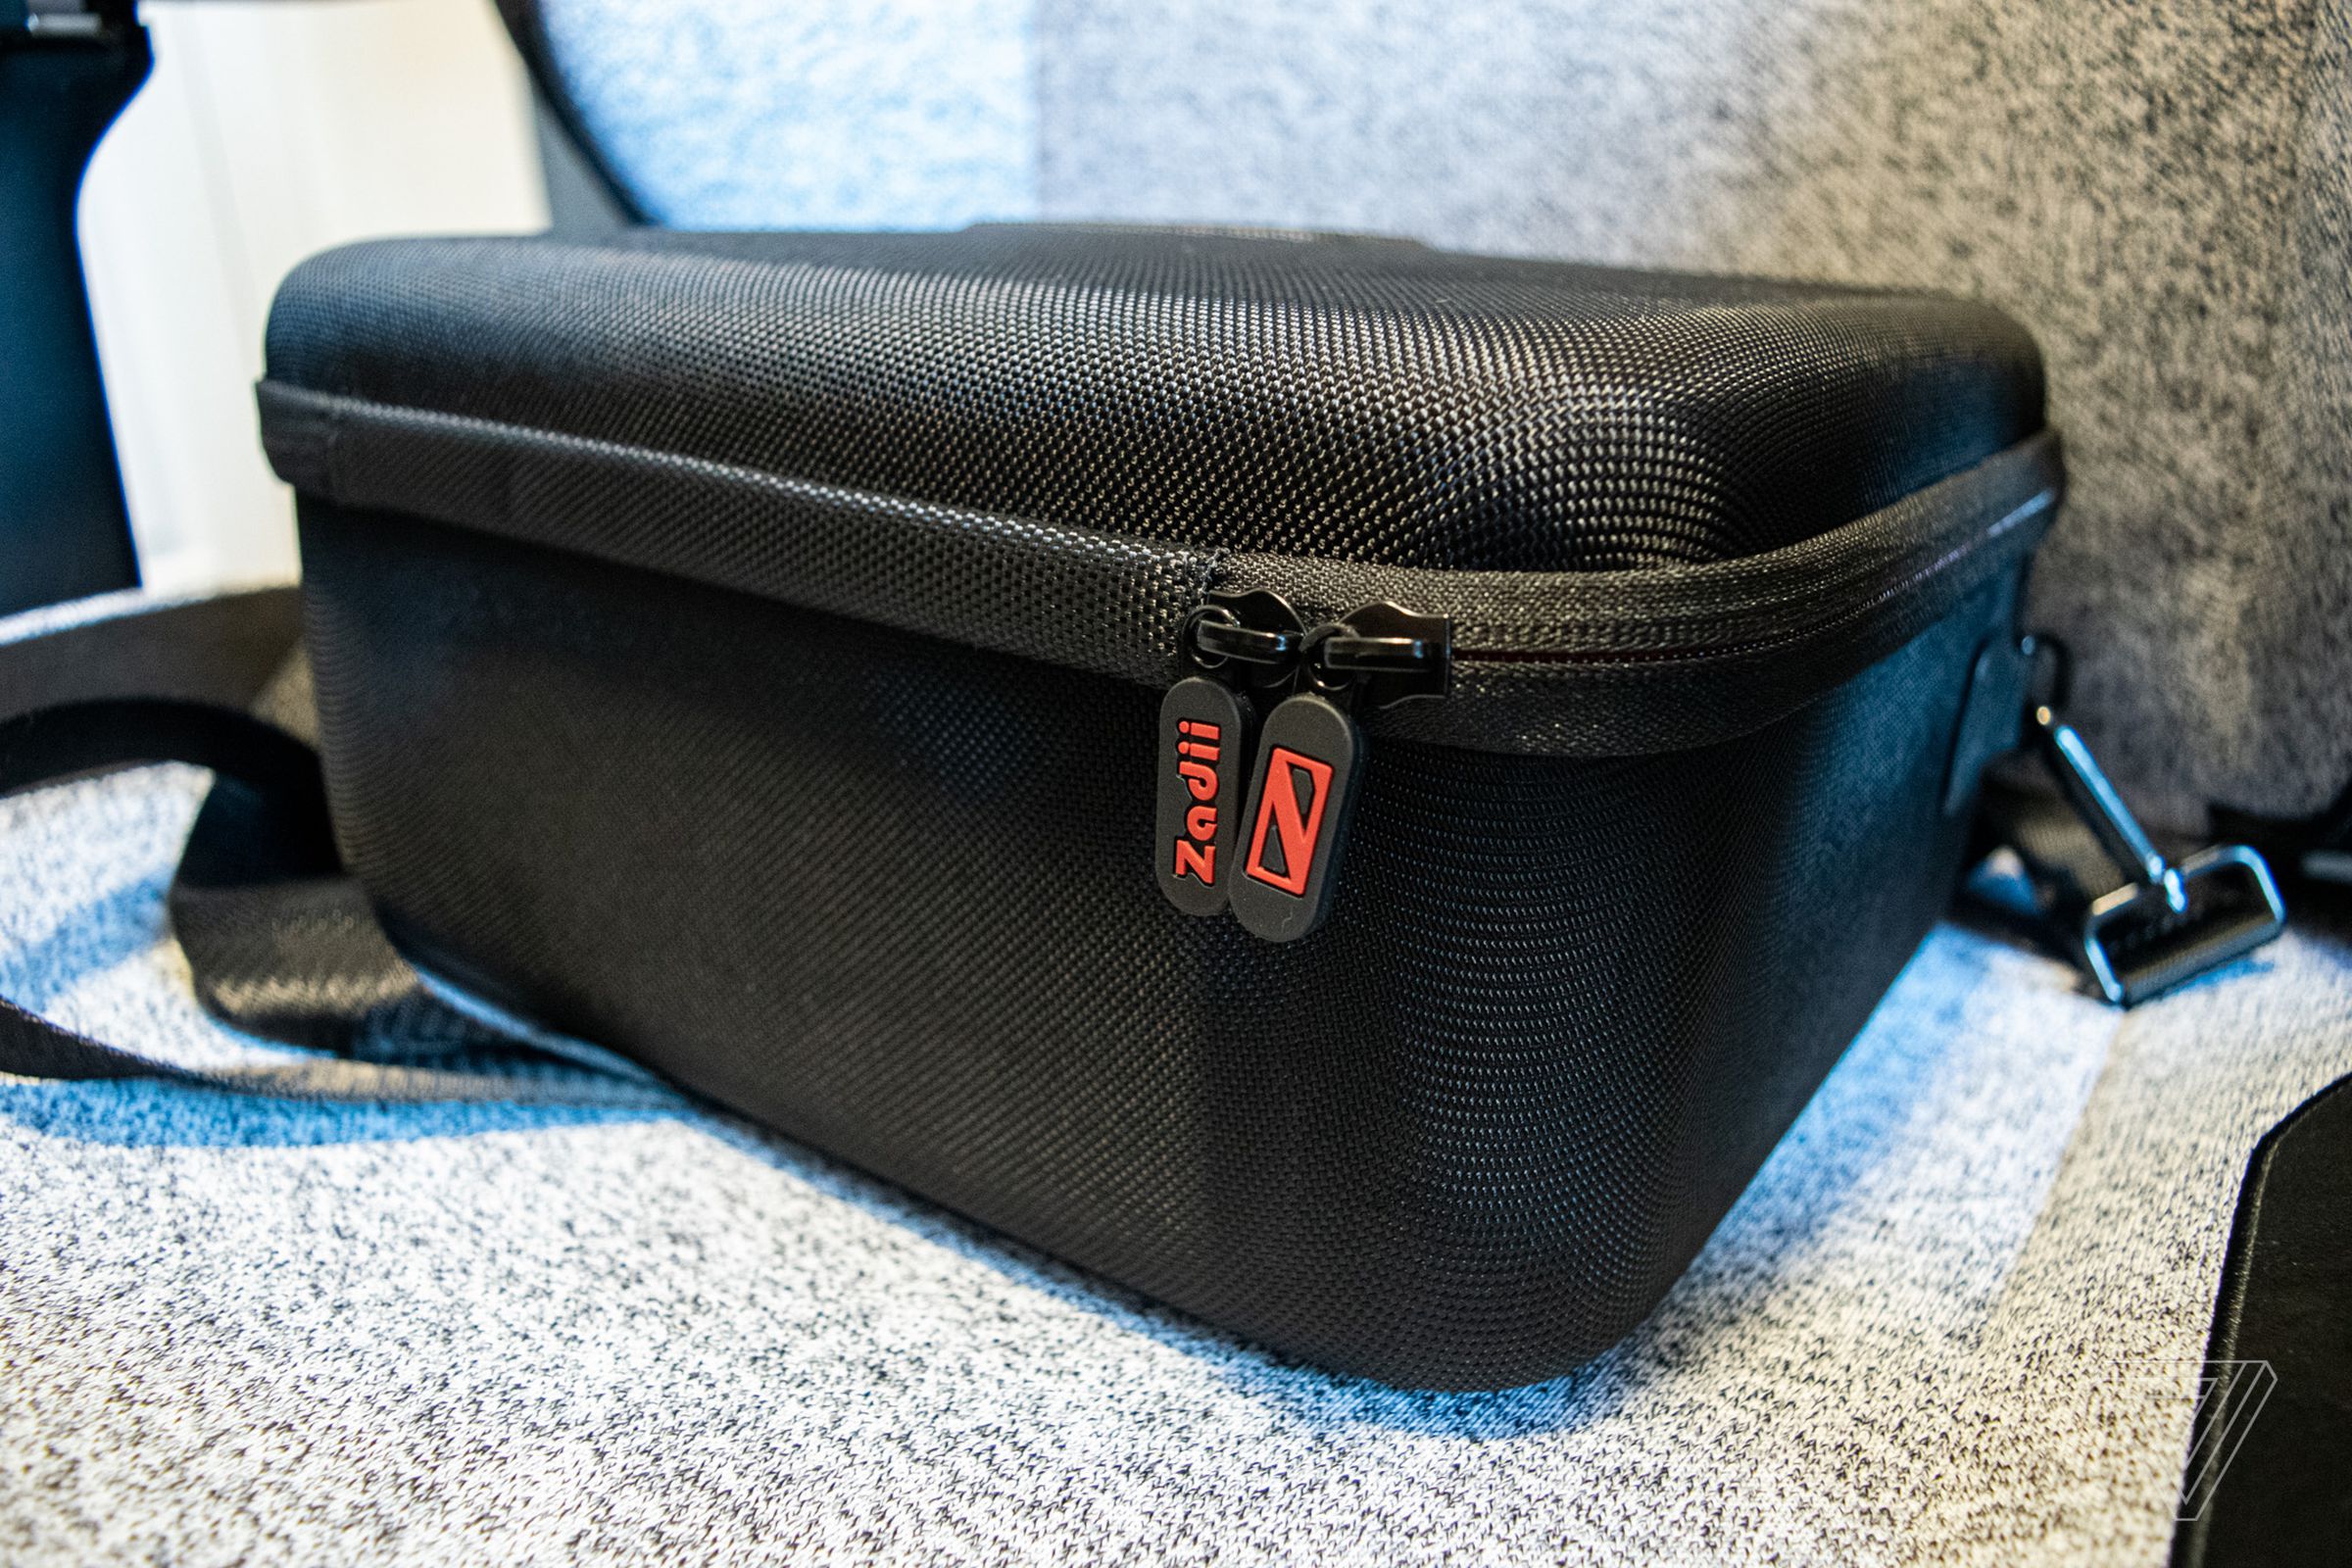 The hardware on Zadii’s travel case is robust and reinforced on the corners.